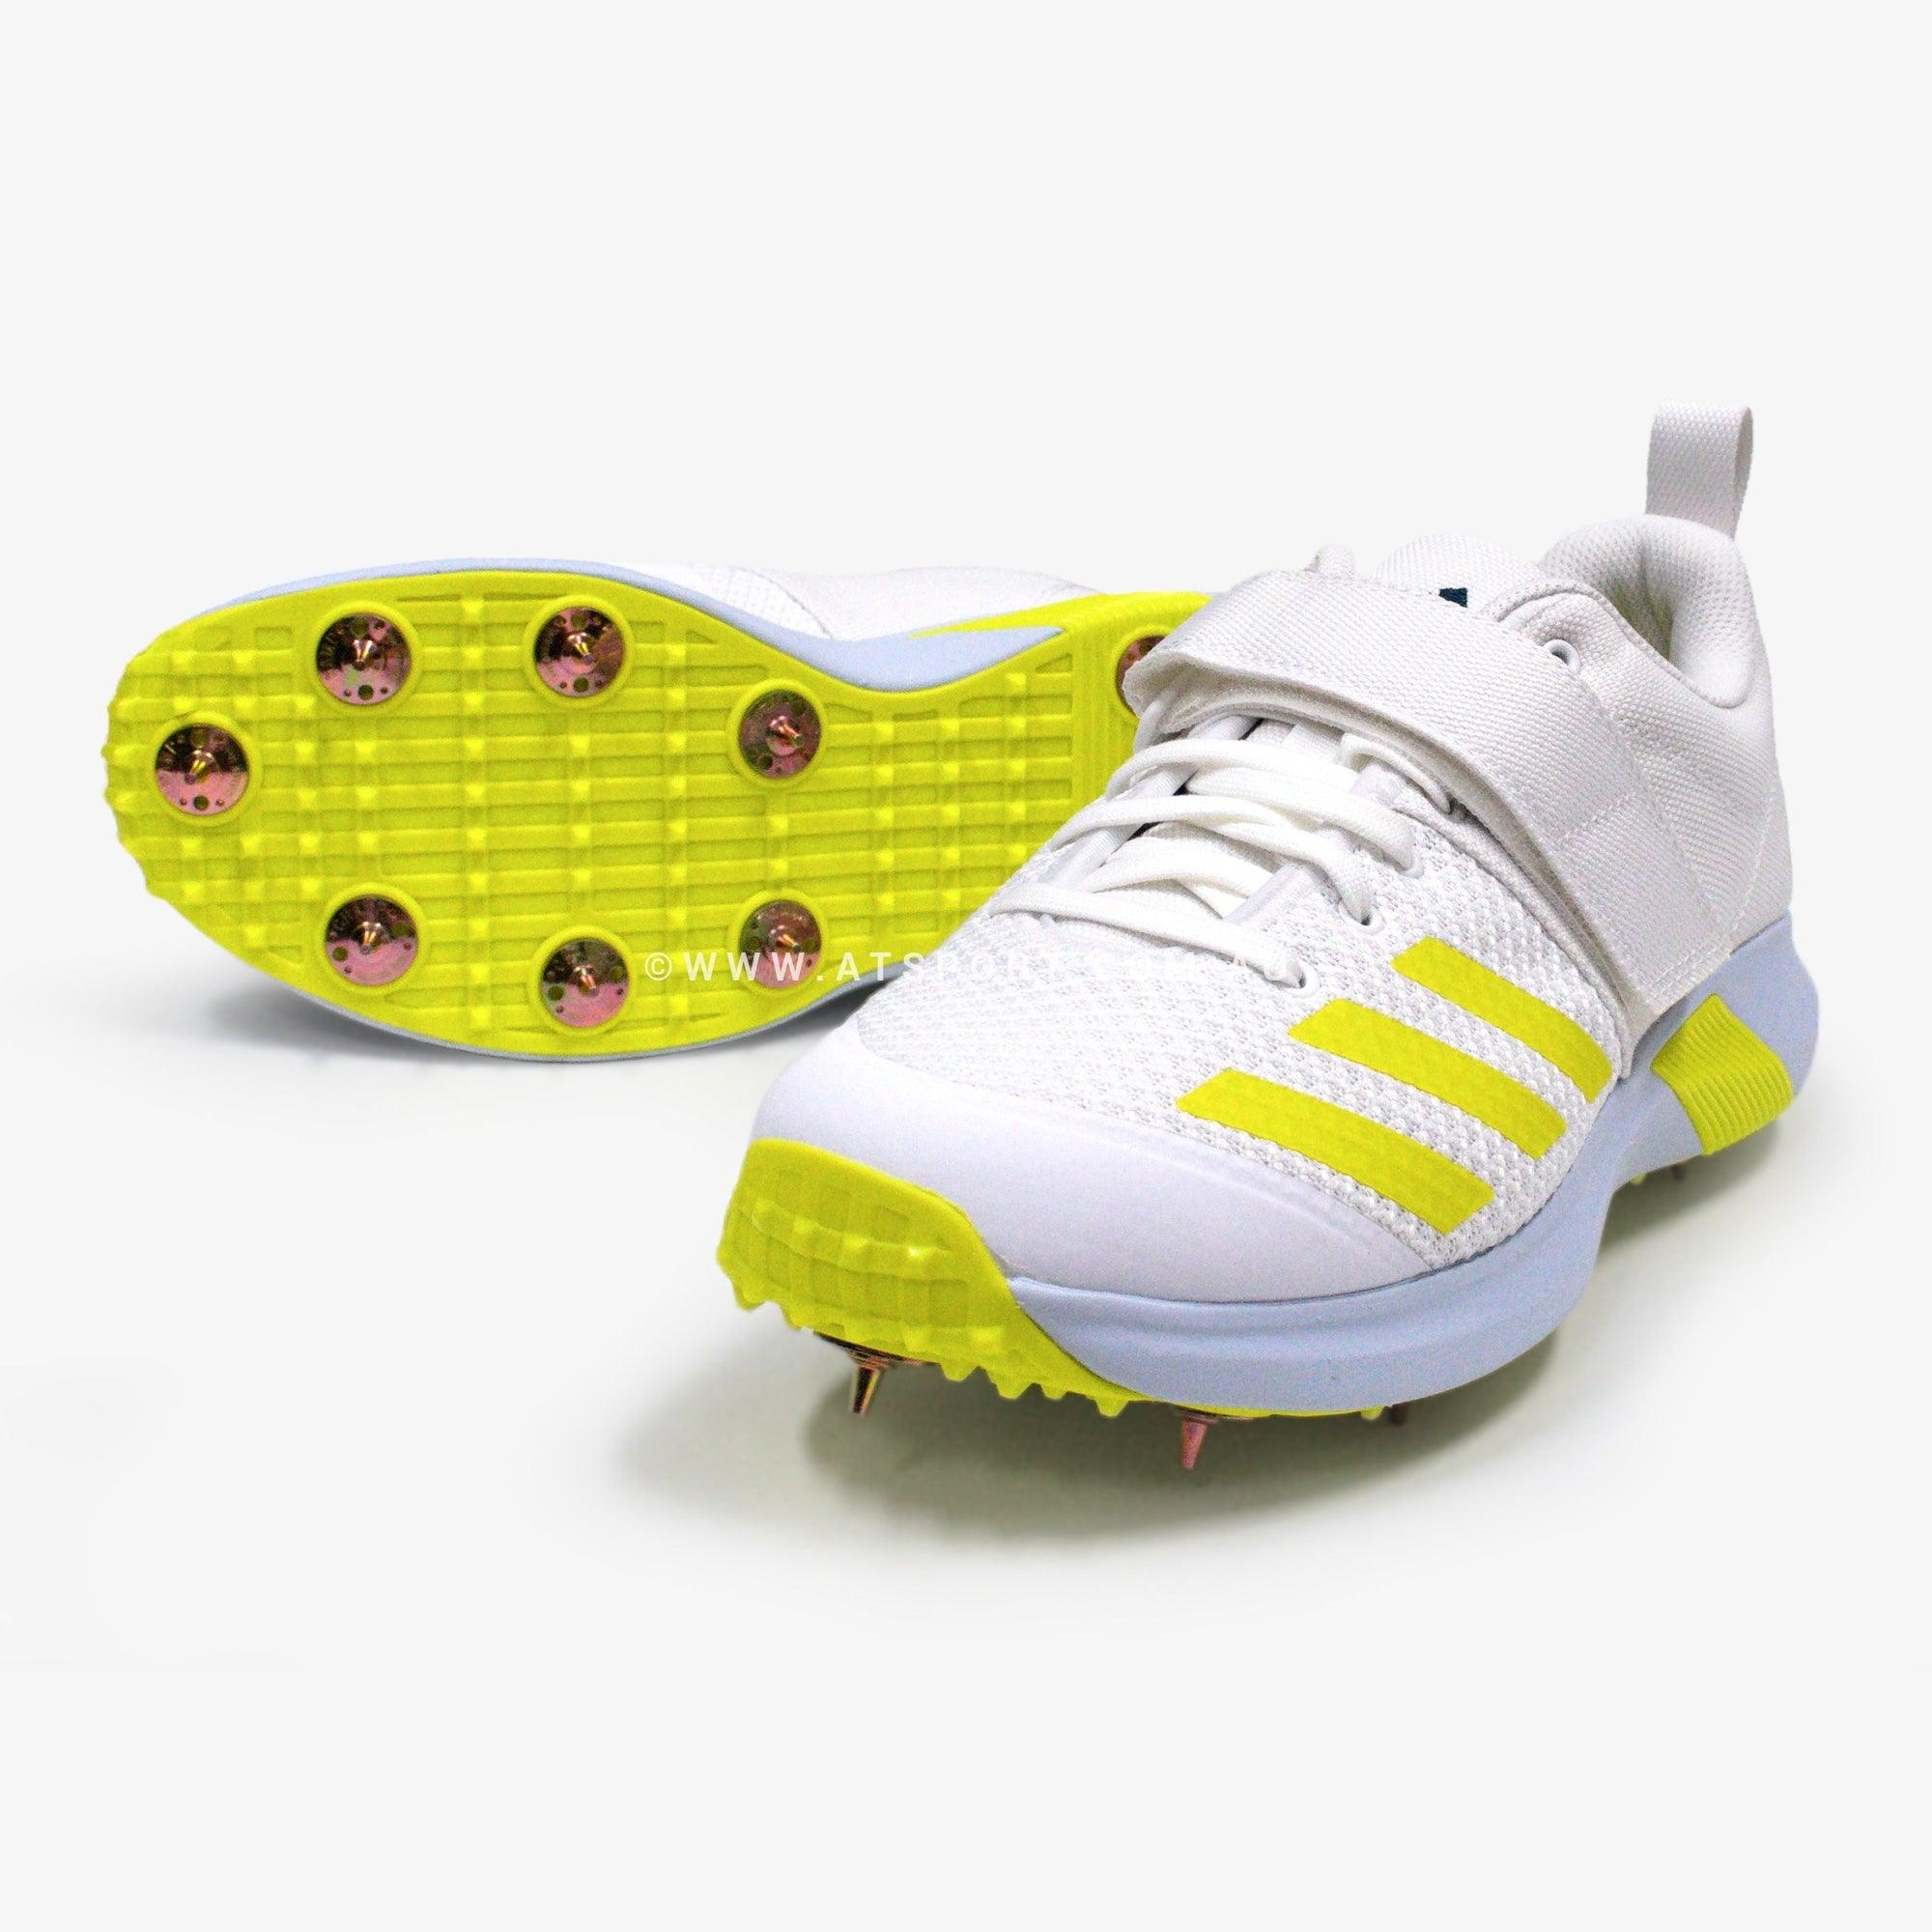 Adidas adipower Vector Spike Cricket Shoes - AT Sports